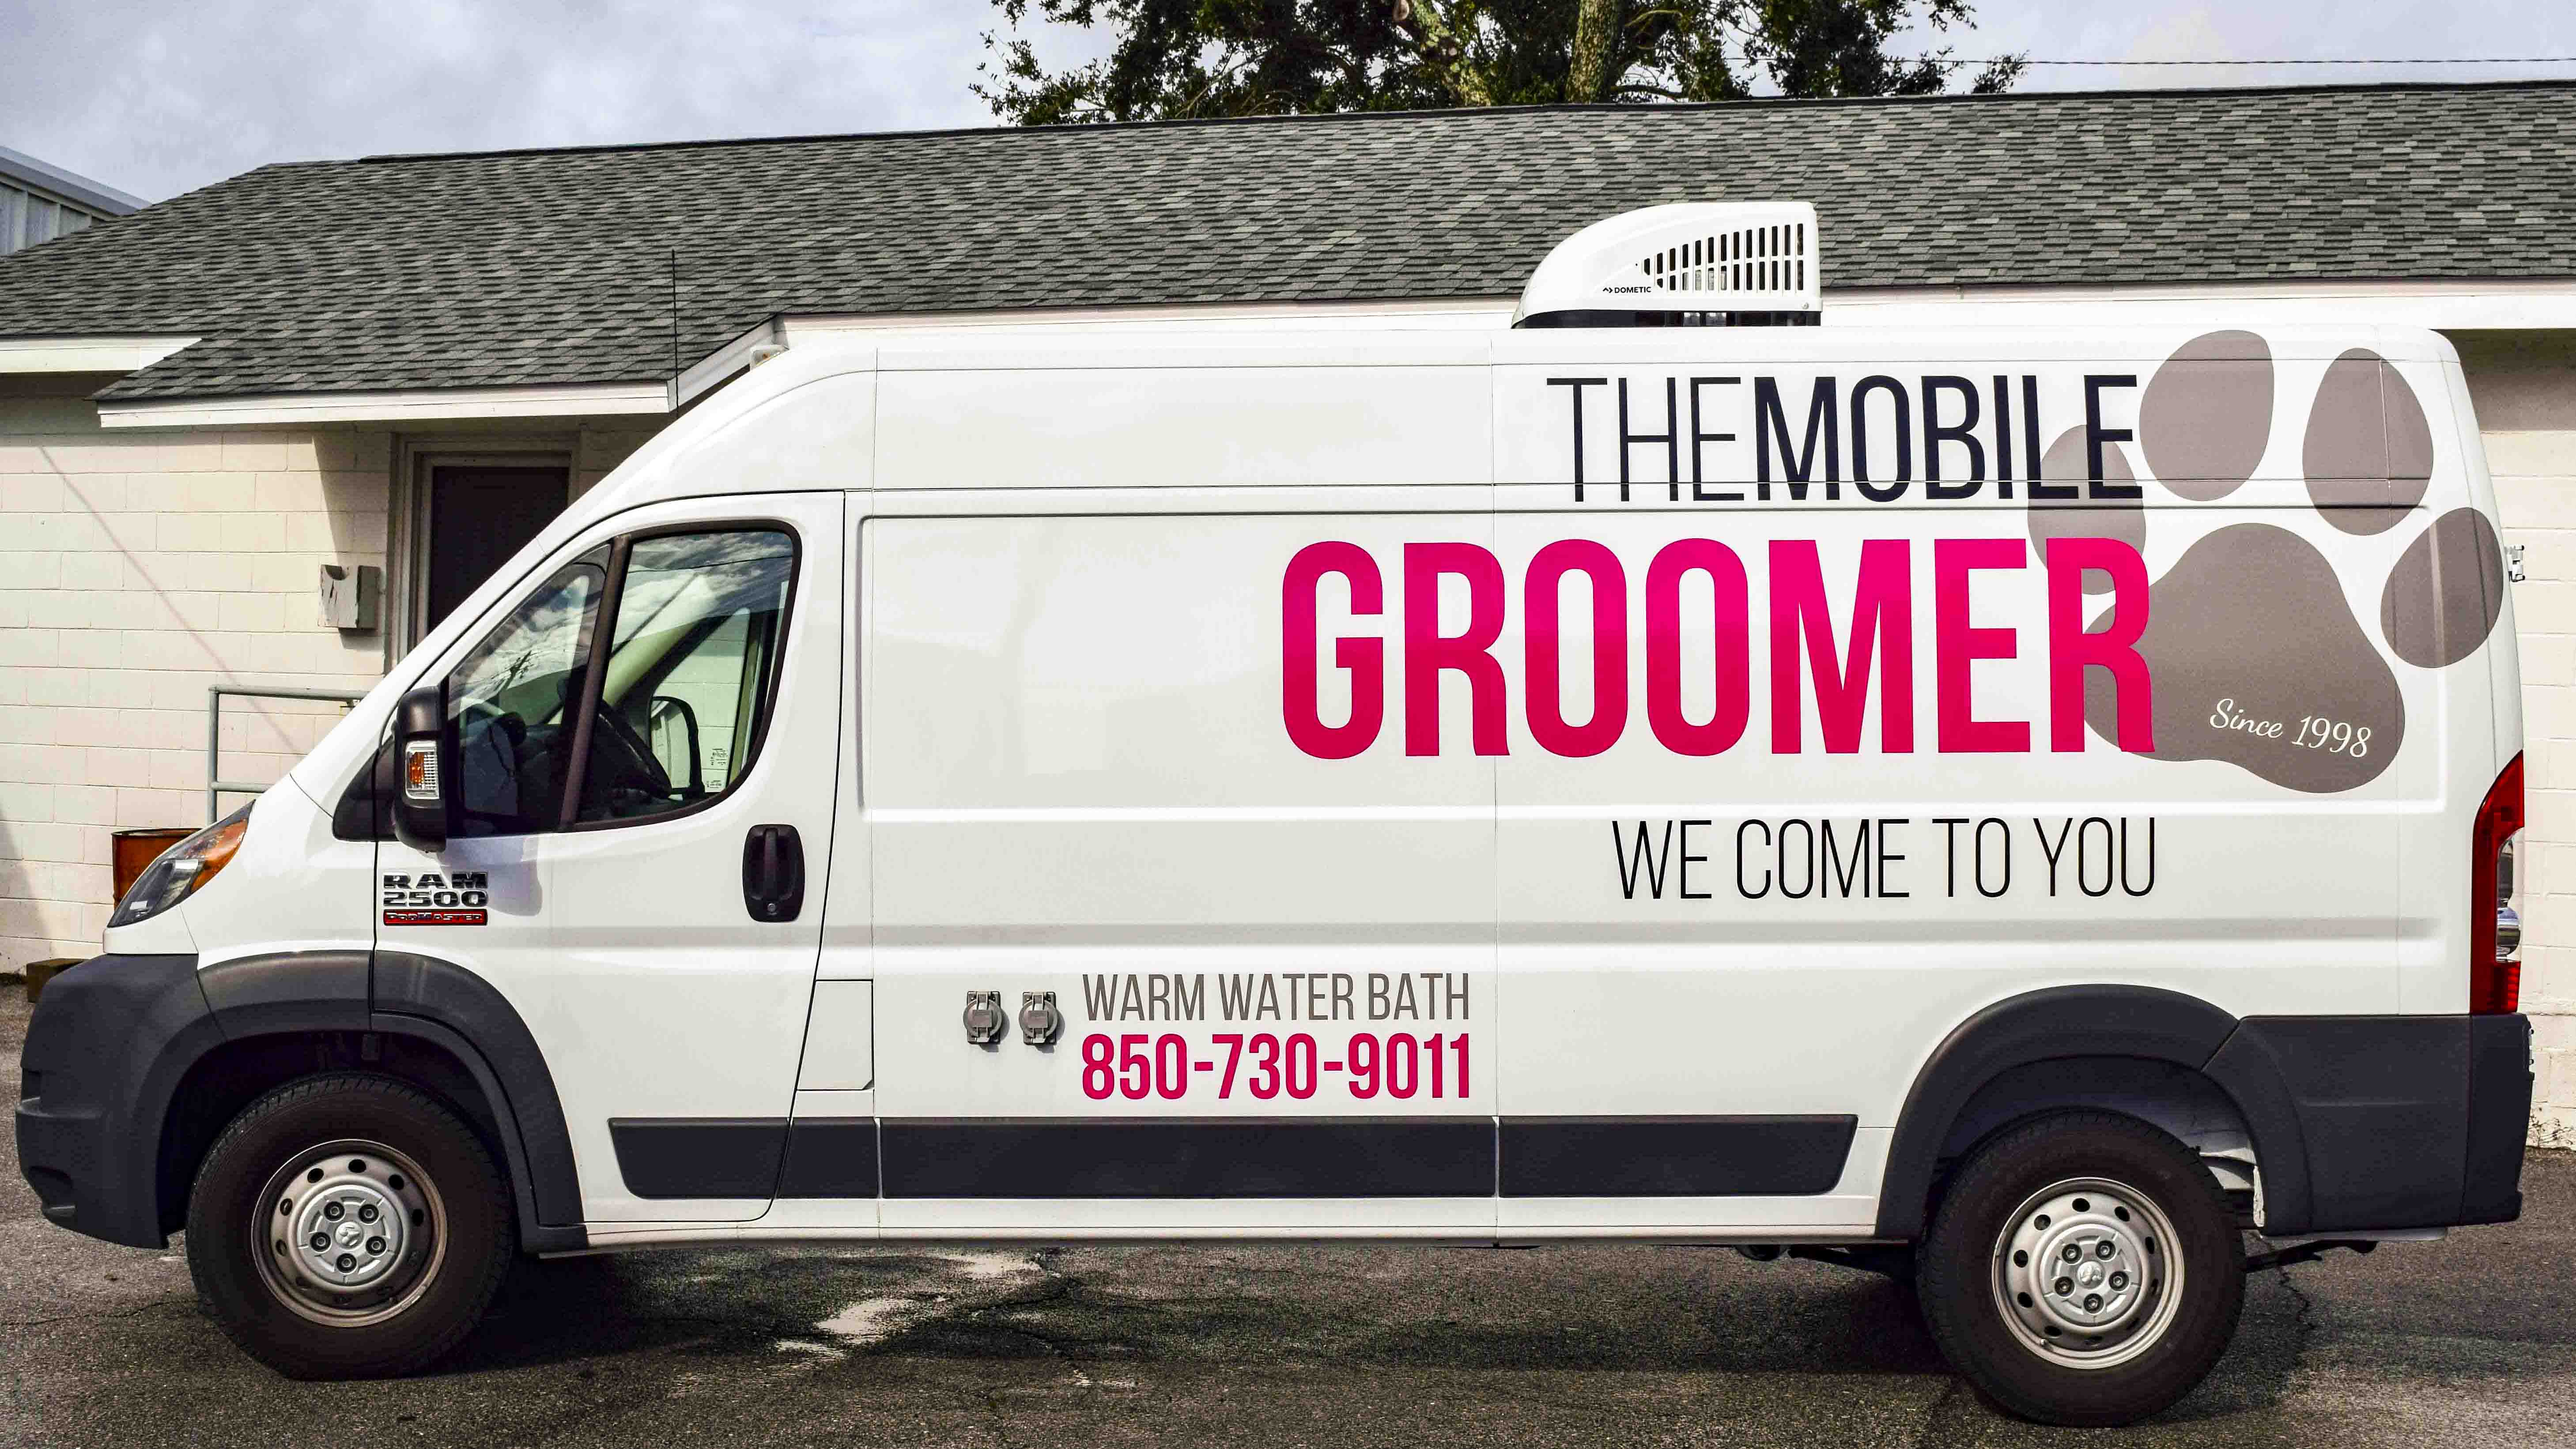 Pensacola Sign Vehicle Graphics - Graphics for The Mobile Groomer Van